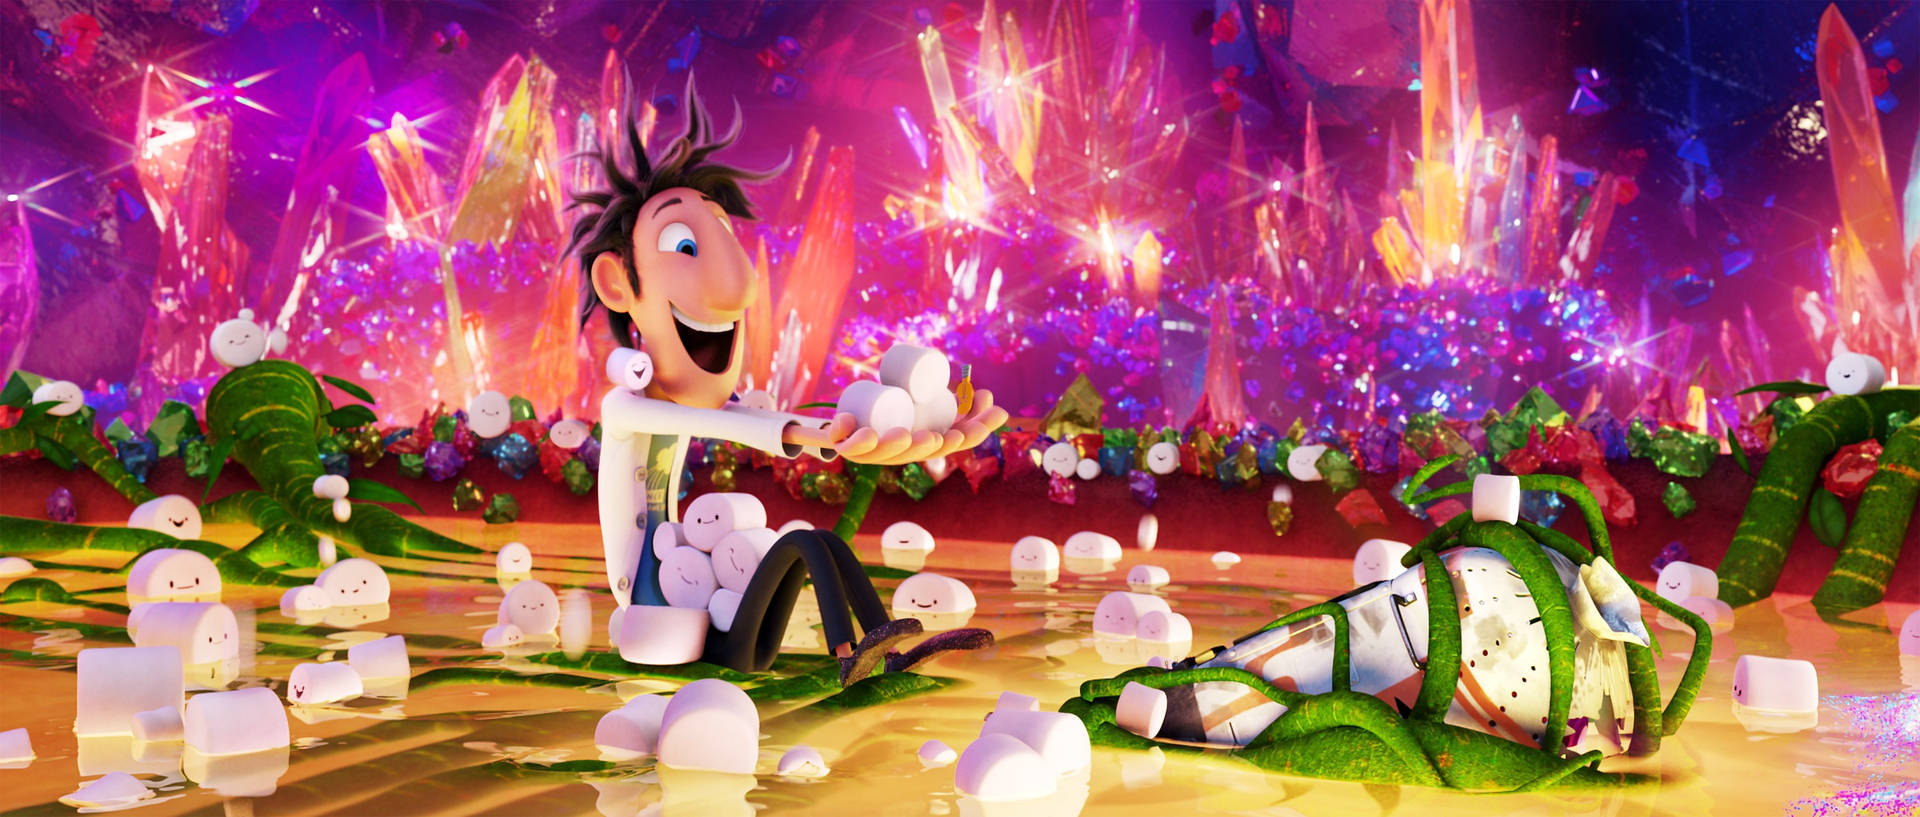 Cloudy With A Chance Of Meatballs 2 Flint With Foodimals Wallpaper